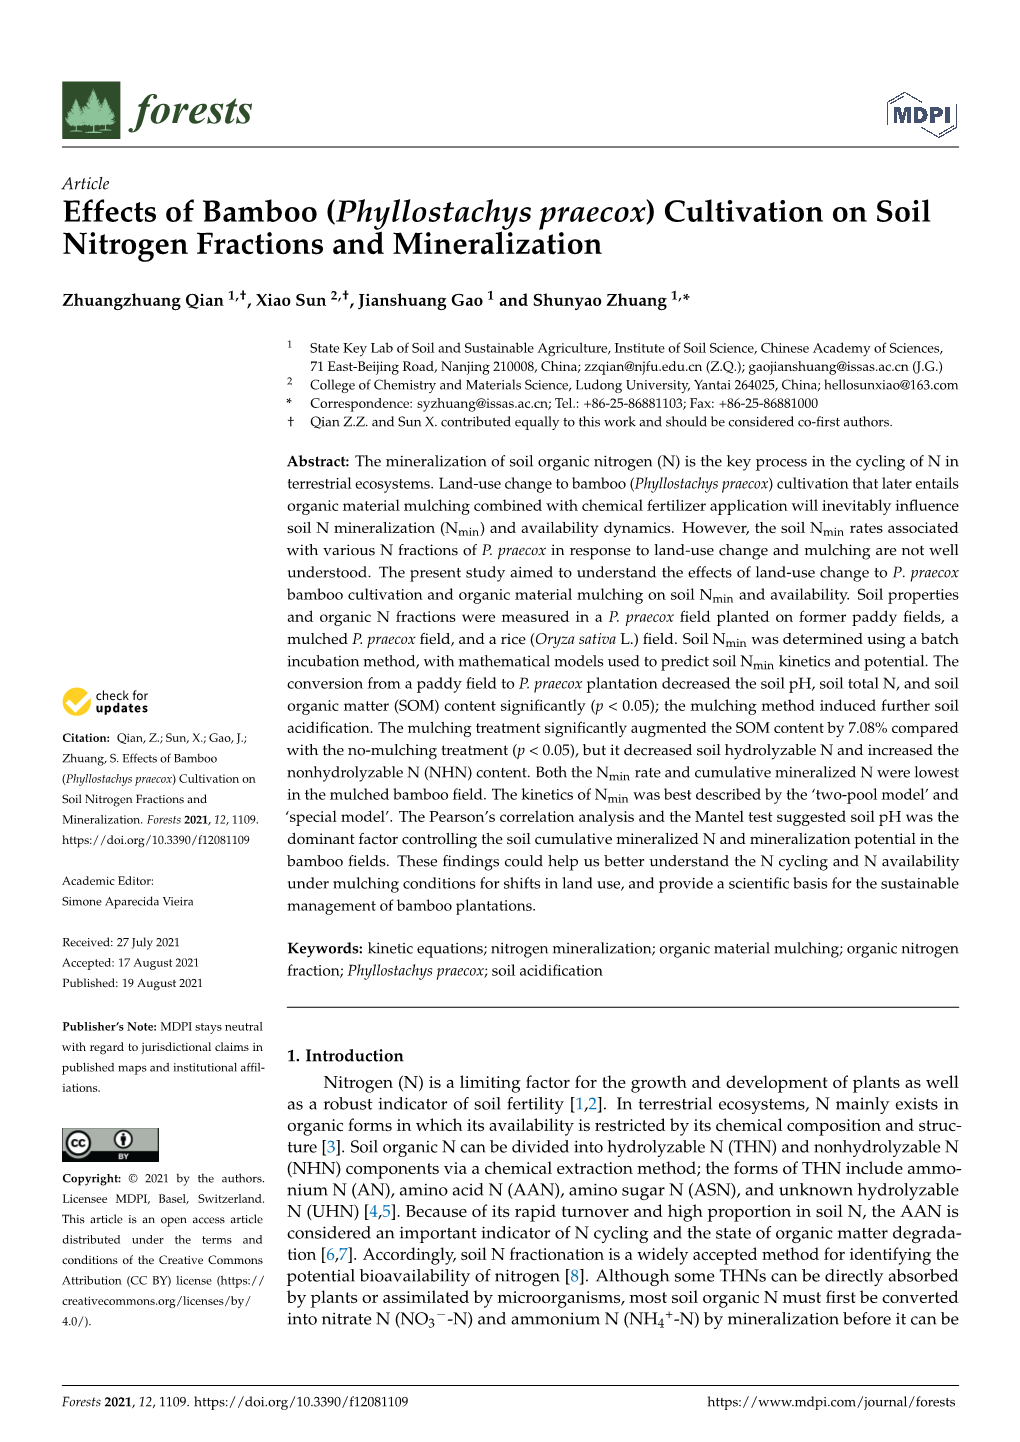 Cultivation on Soil Nitrogen Fractions and Mineralization